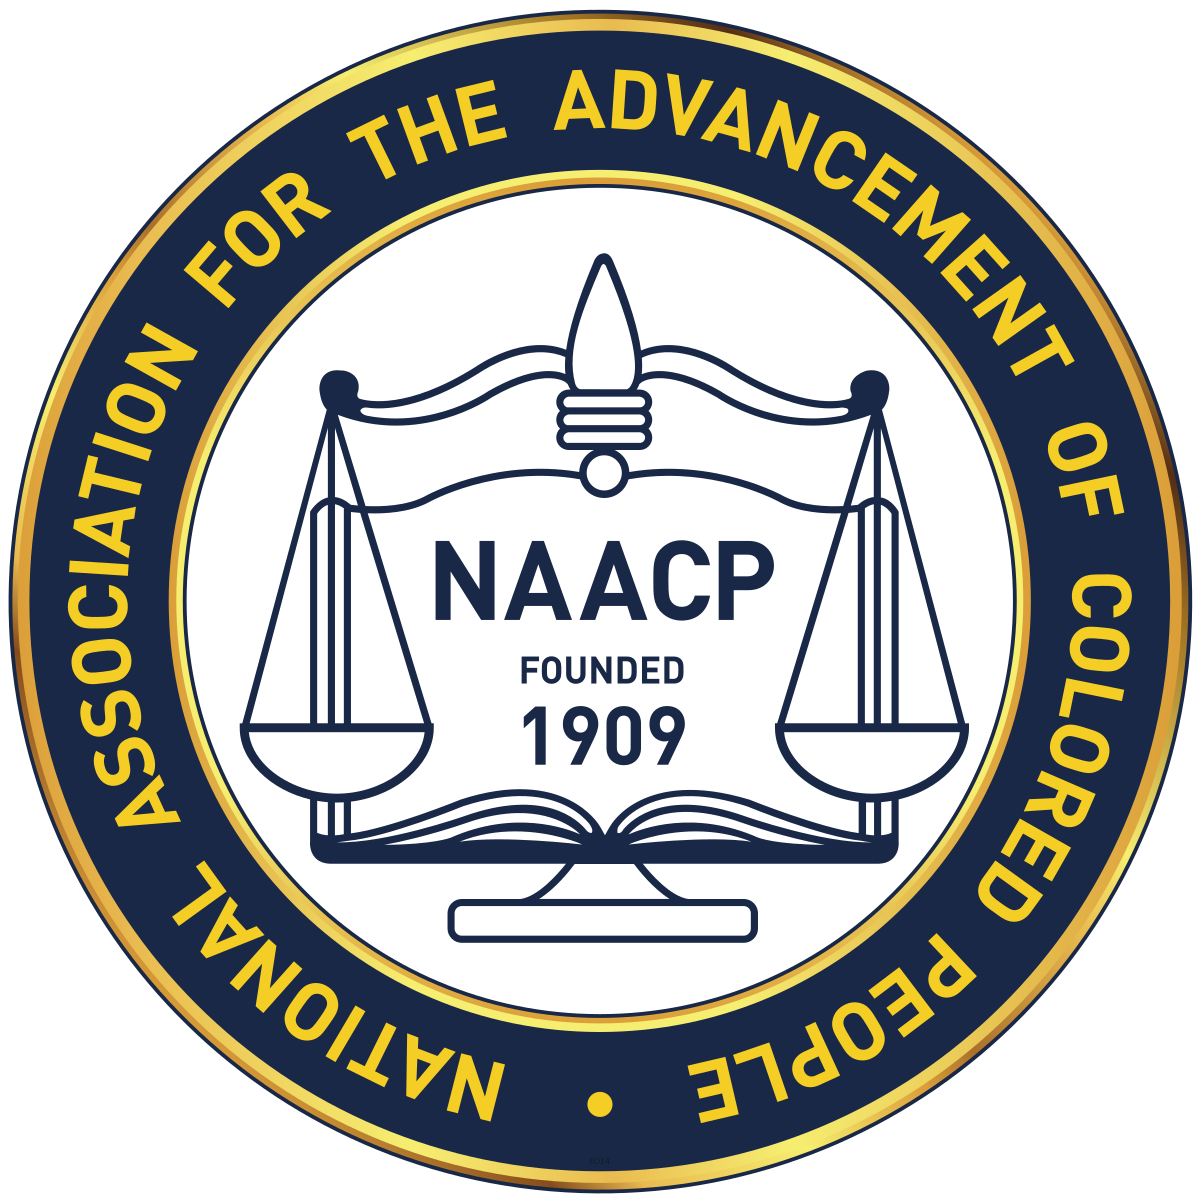 https://aiforthepeopleus.org/wp-content/uploads/2022/06/NAACP_seal.svg.png